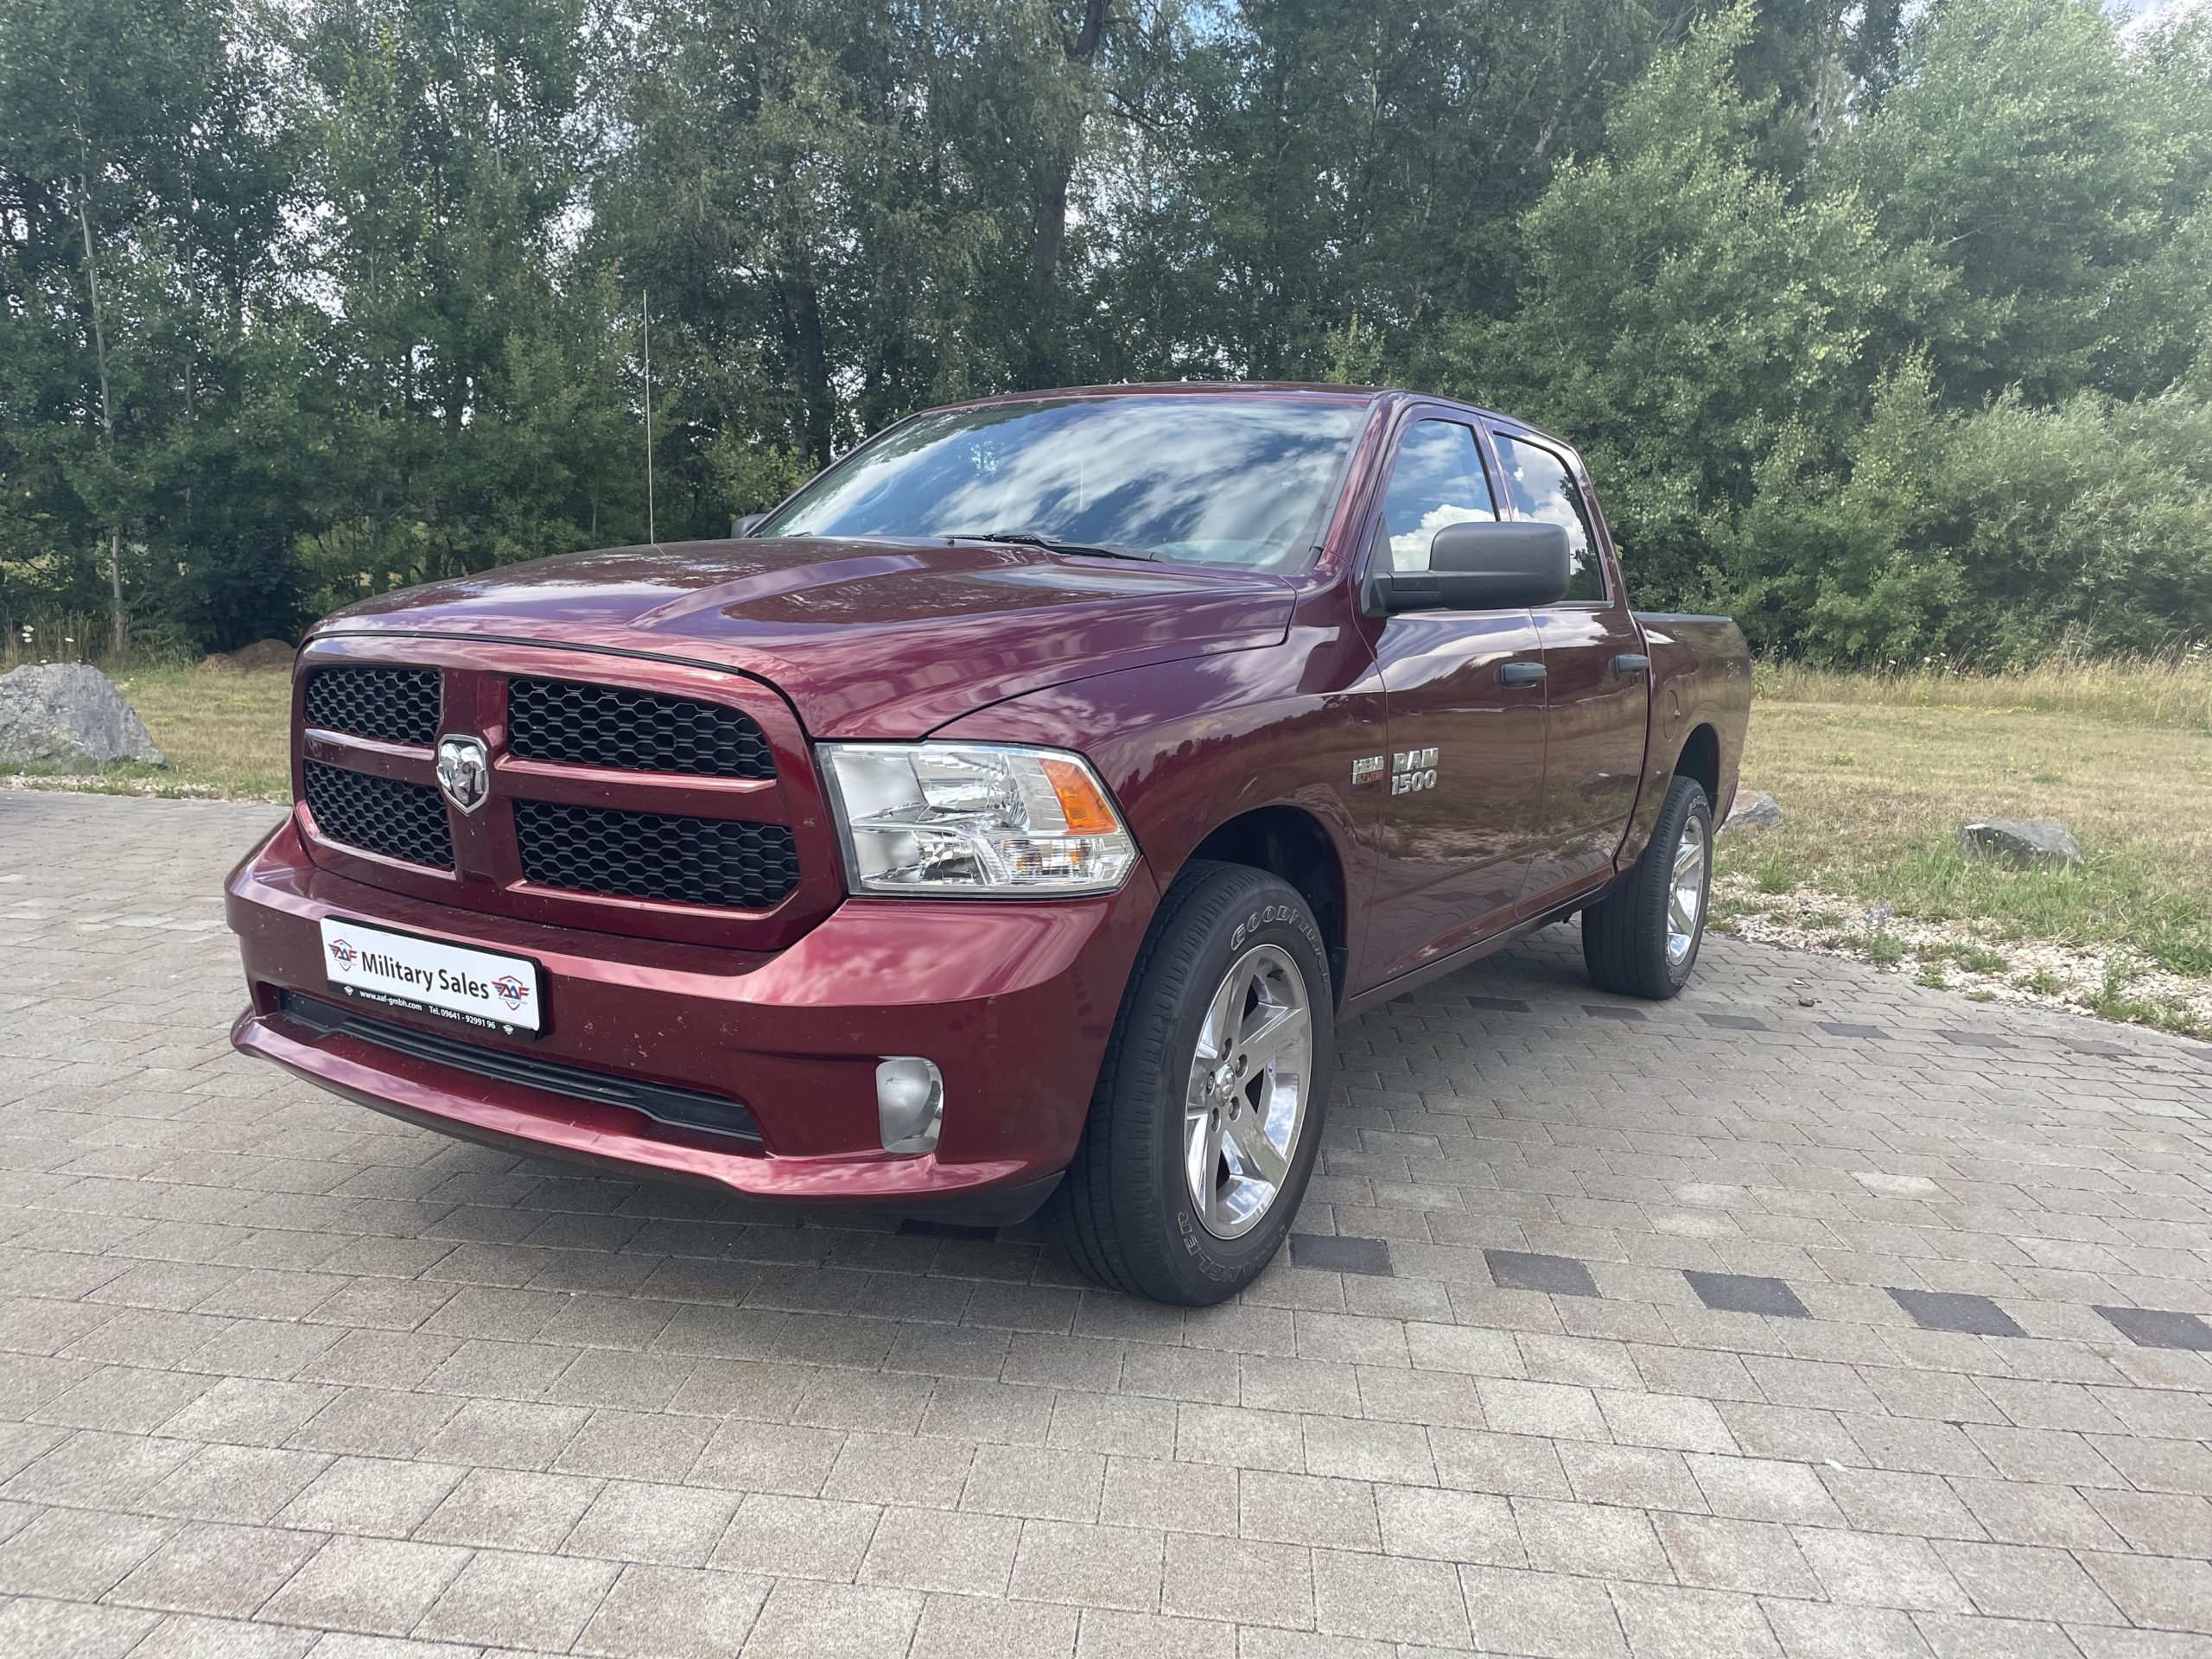 2017 Dodge Ram 1500<br>4WD</br>as low as </br>$252 per paycheck